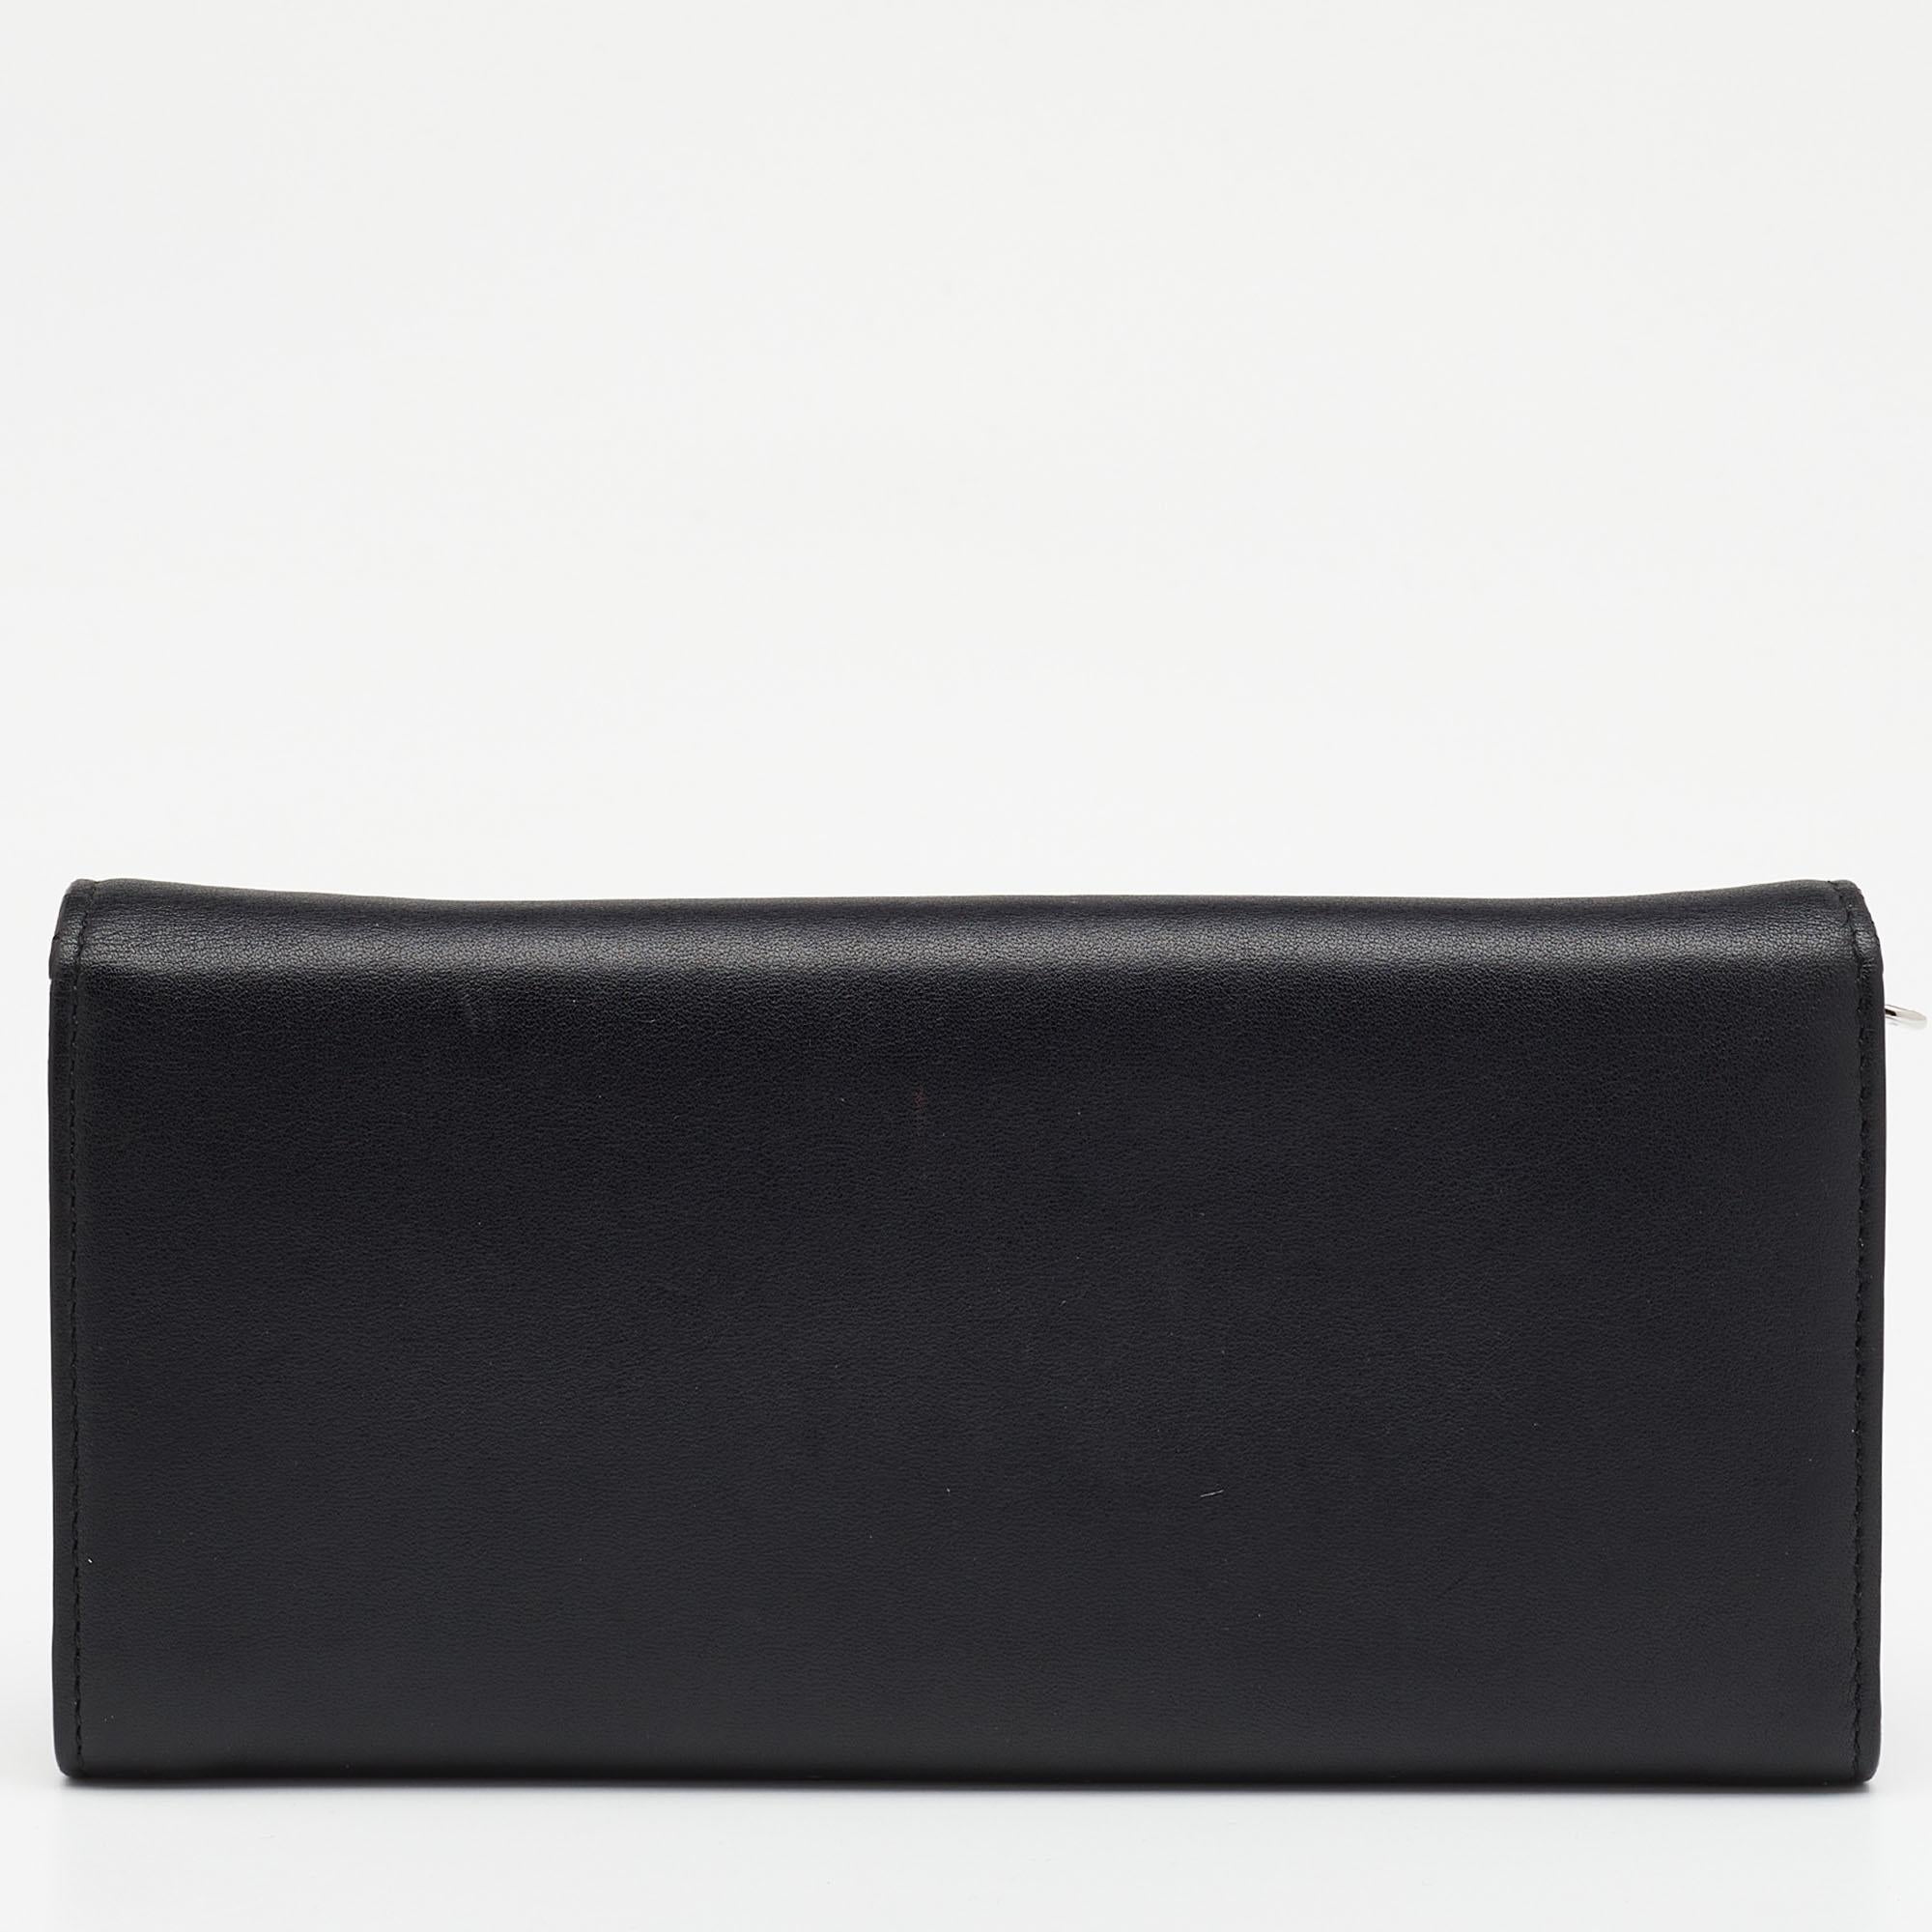 With an attractive color combination of black and pink, this Dior Rendez-Vous clutch is as stylish as practical. Its leather and fabric interior will keep your essentials in a refined way. Made from leather, the brand detailing on the front flap